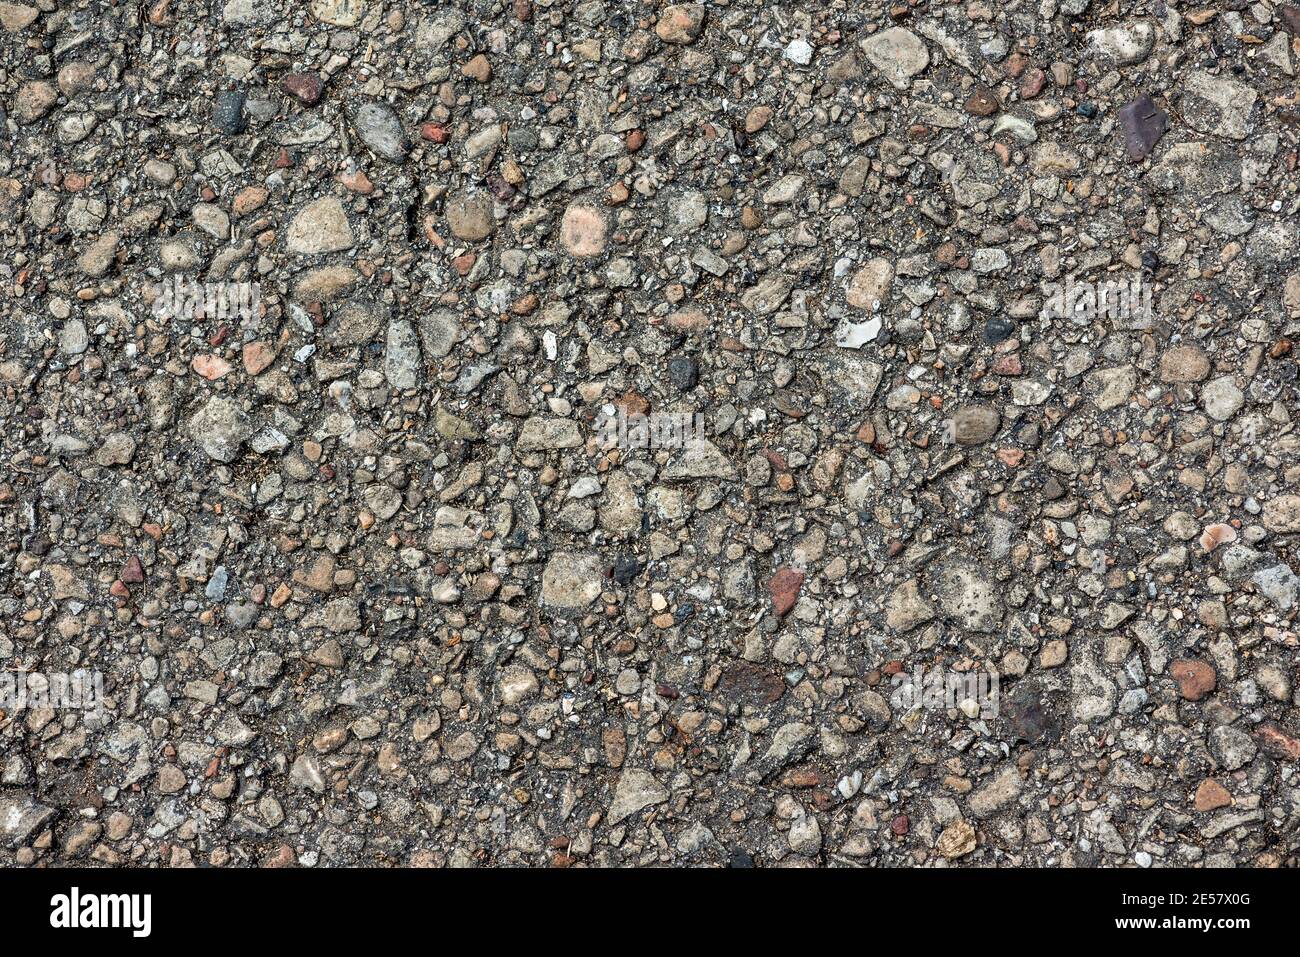 Abstract pattern of gravel, natural road texture, rock material Stock Photo